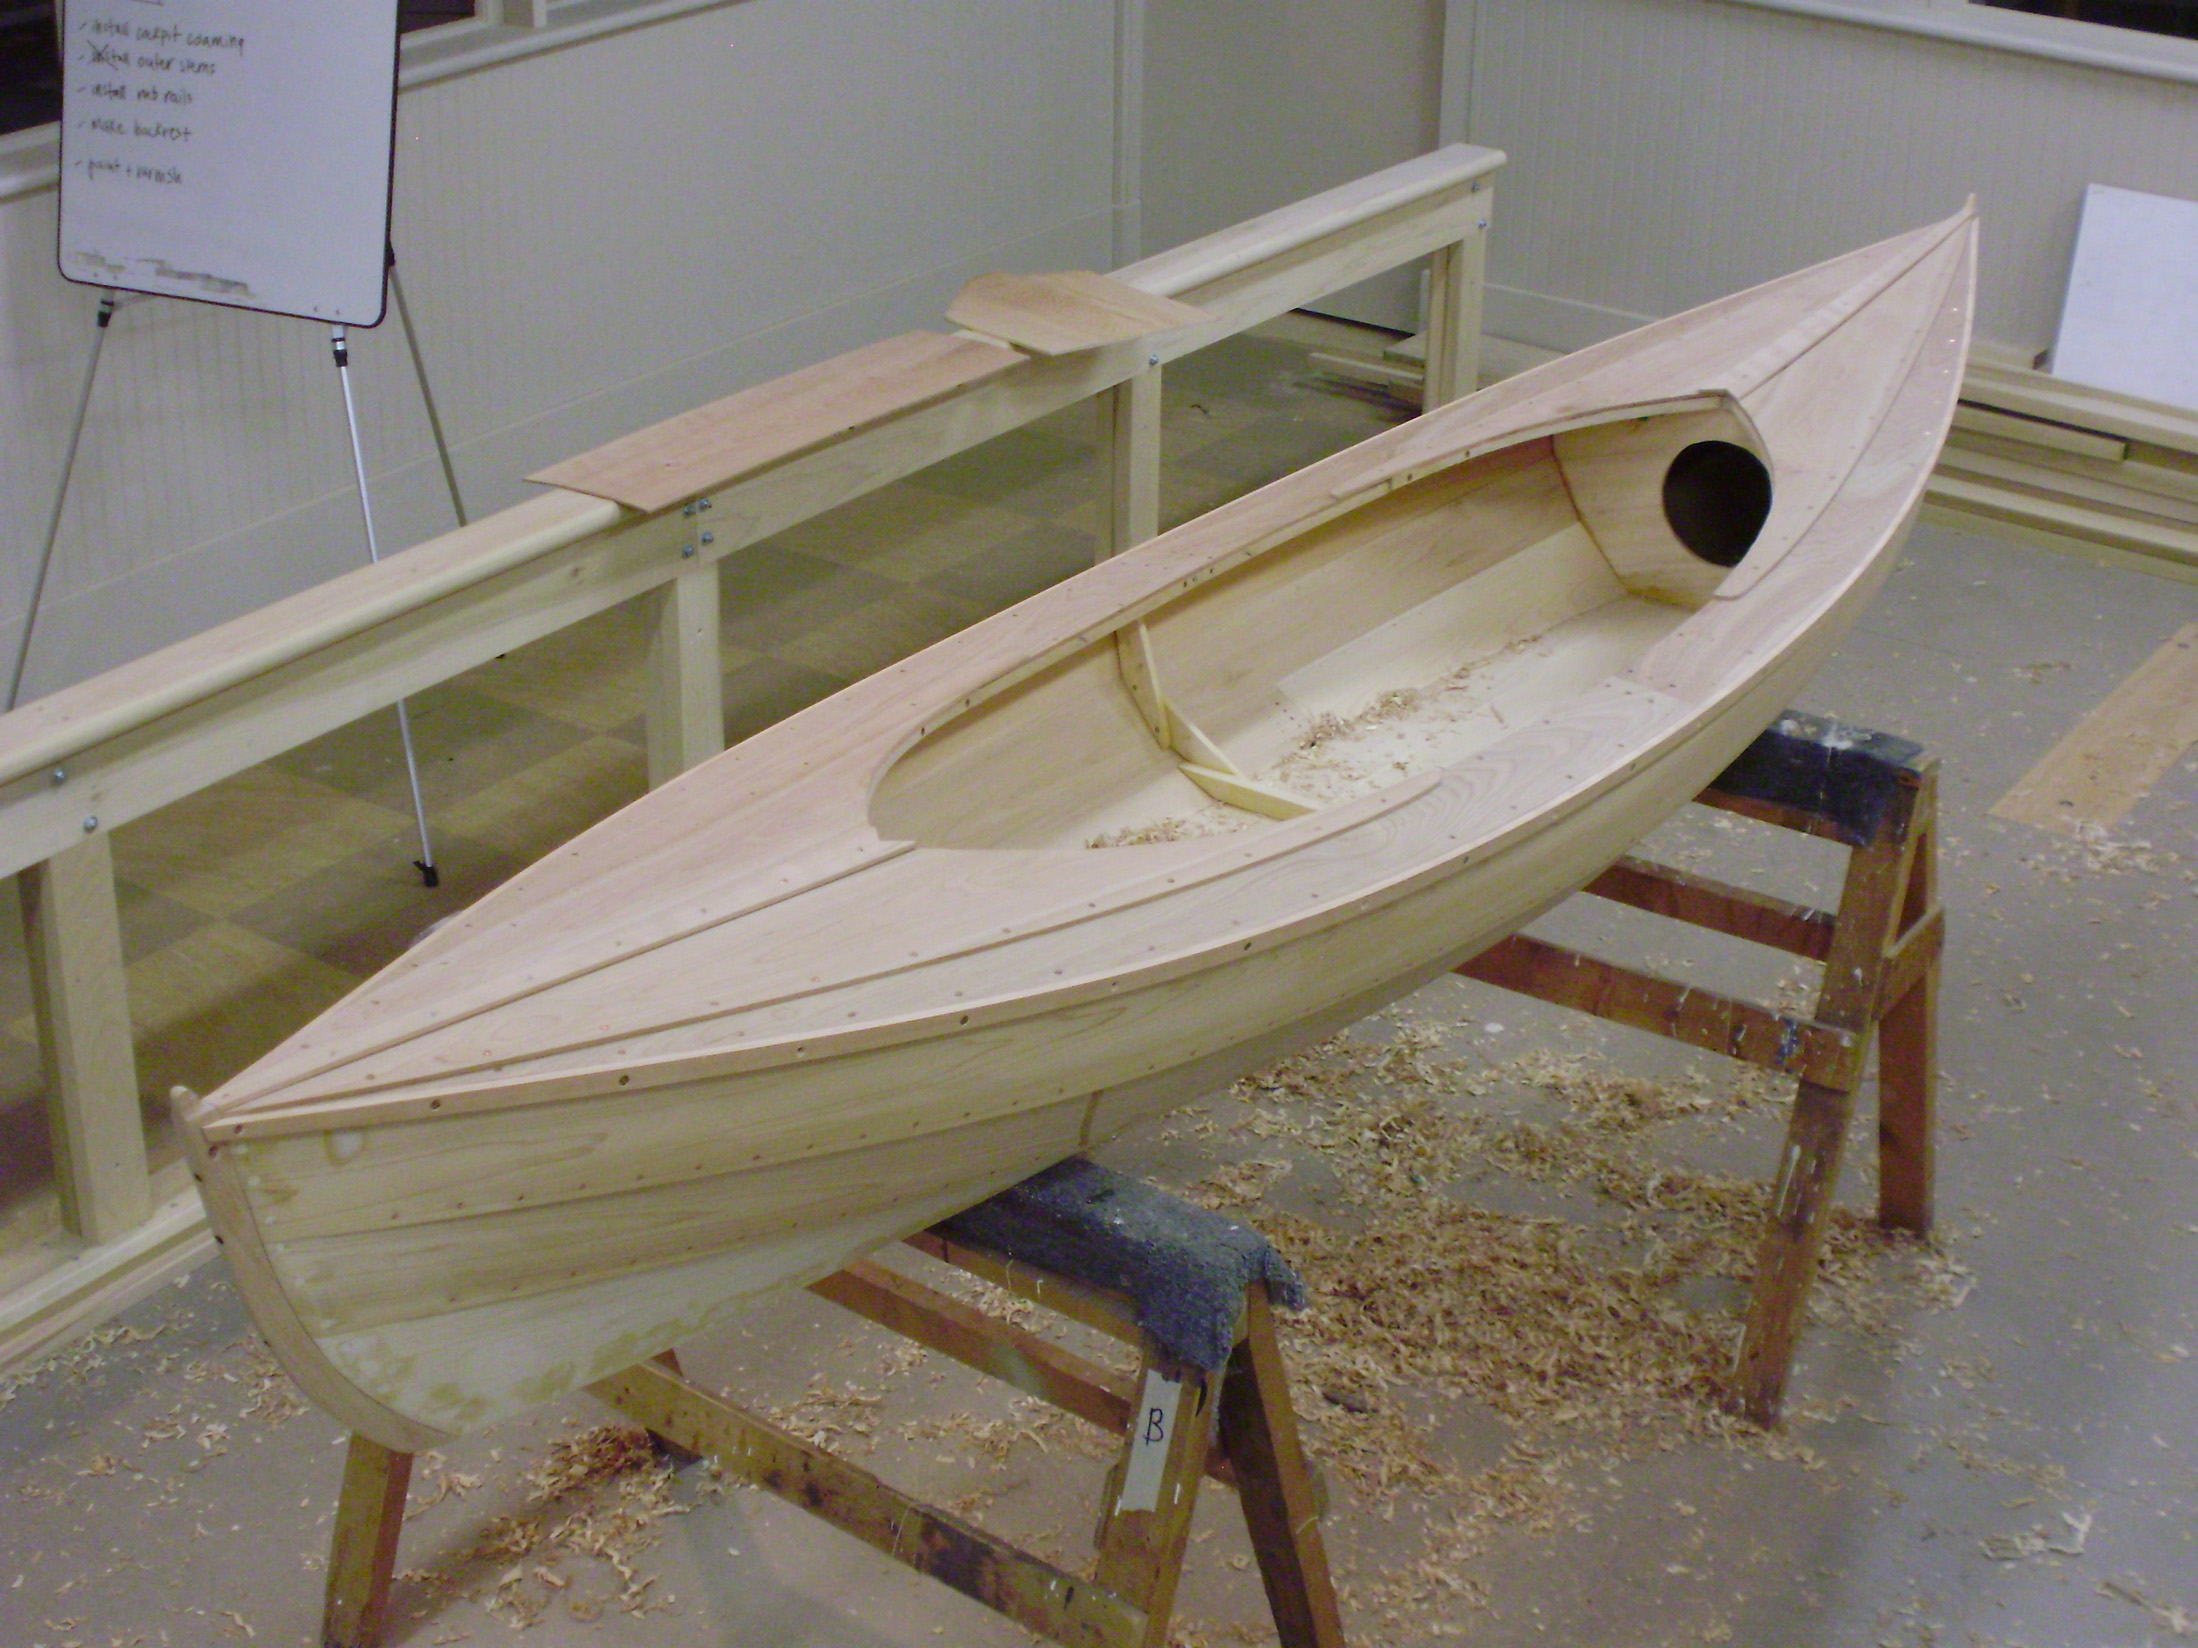 Boat Building Playing With Boats Page 2